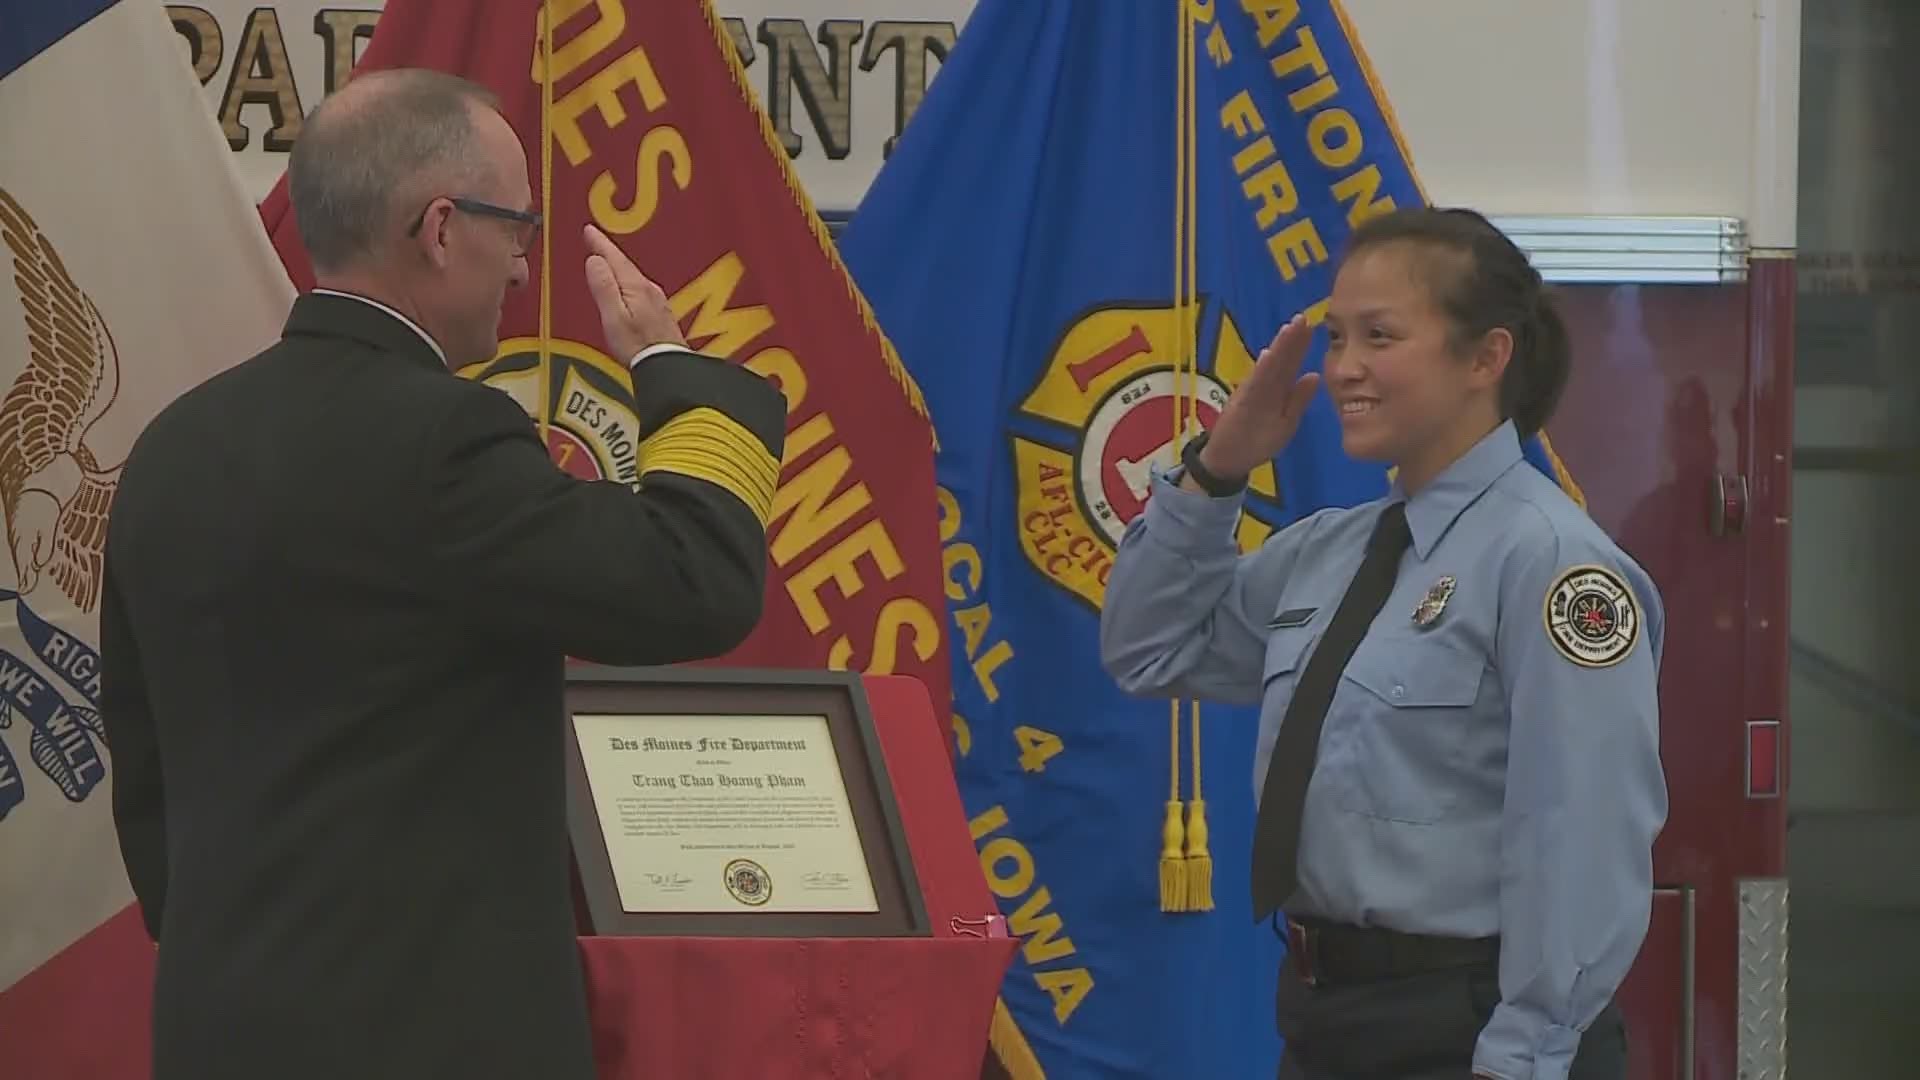 On Thursday, Trang Pham became the first Asian American woman to become a Des Moines firefighter.